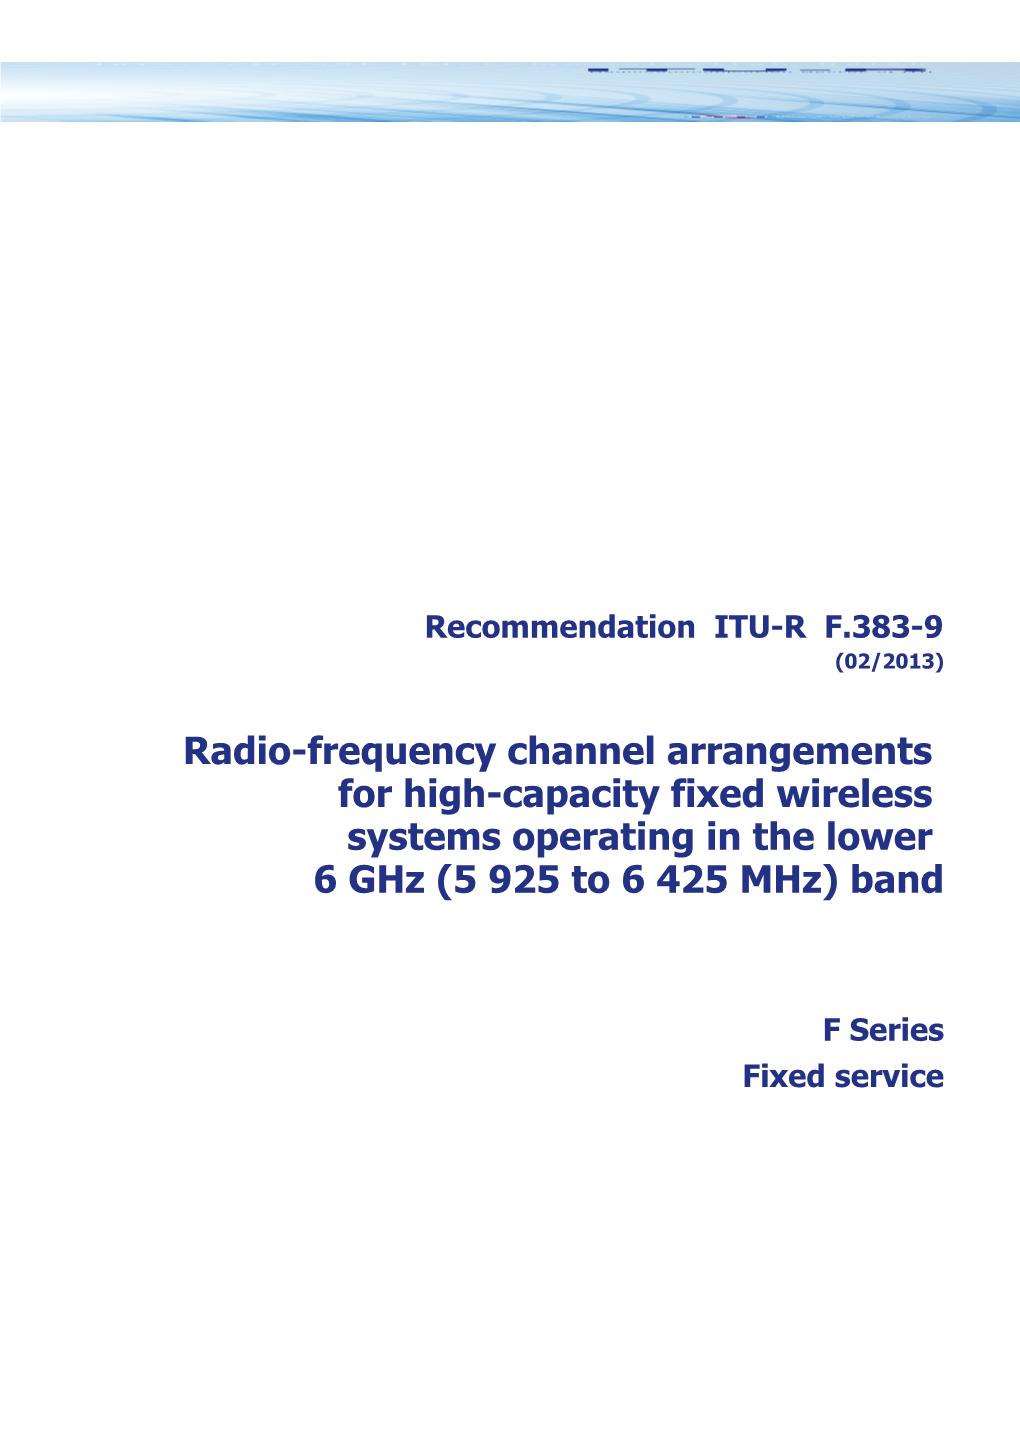 RECOMMENDATION ITU-R F.383-9 - Radio-Frequency Channel Arrangements for High-Capacity Fixed